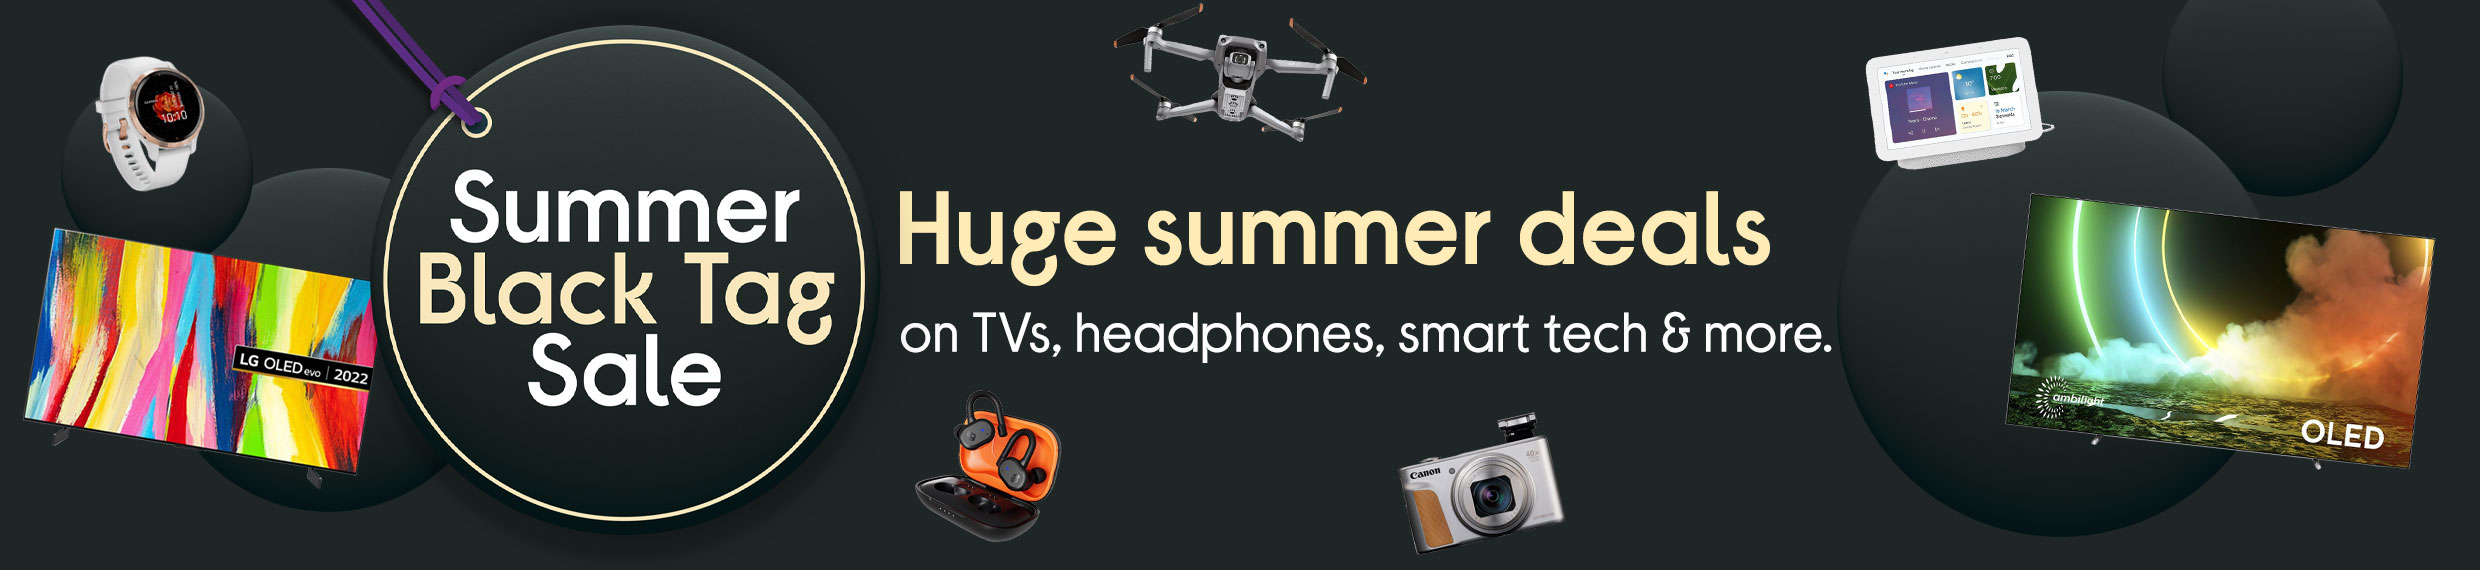 Summer Black Tag CE Sale at Currys